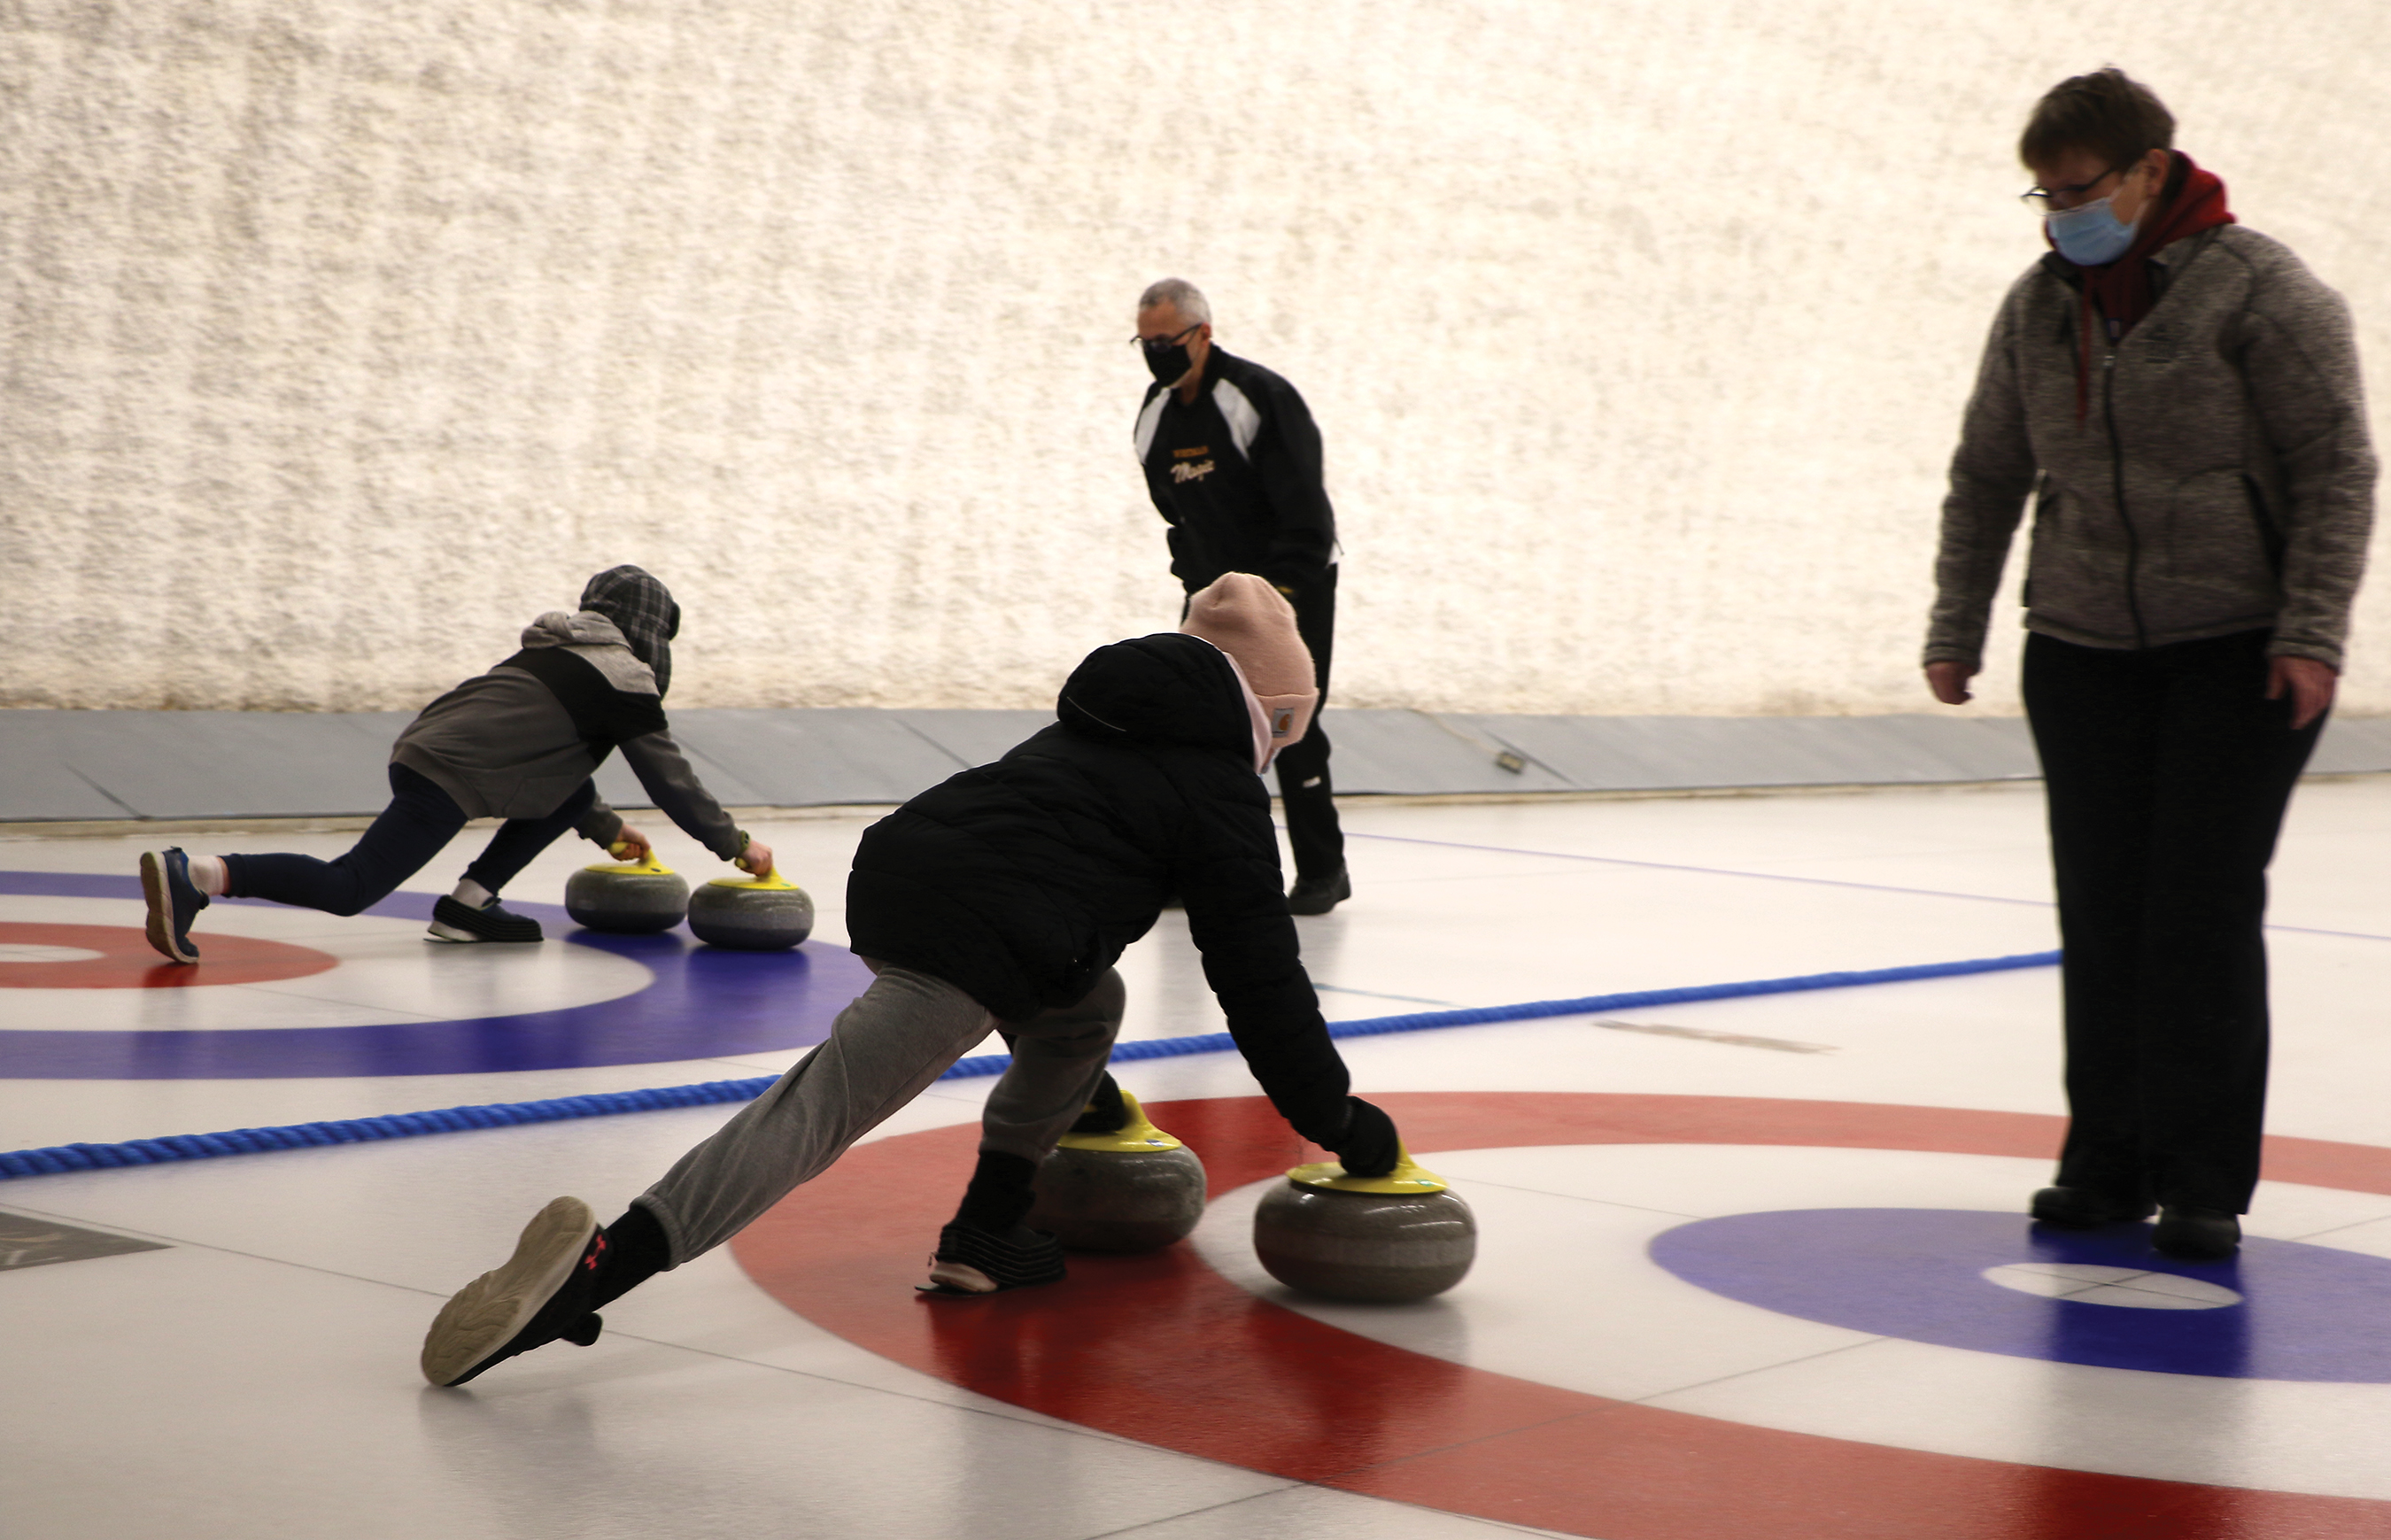 Students from Maryfield School learning how to slide with curling rocks on the ice with curling instructors Randy O’Greysik (left) and Barb Swallow.